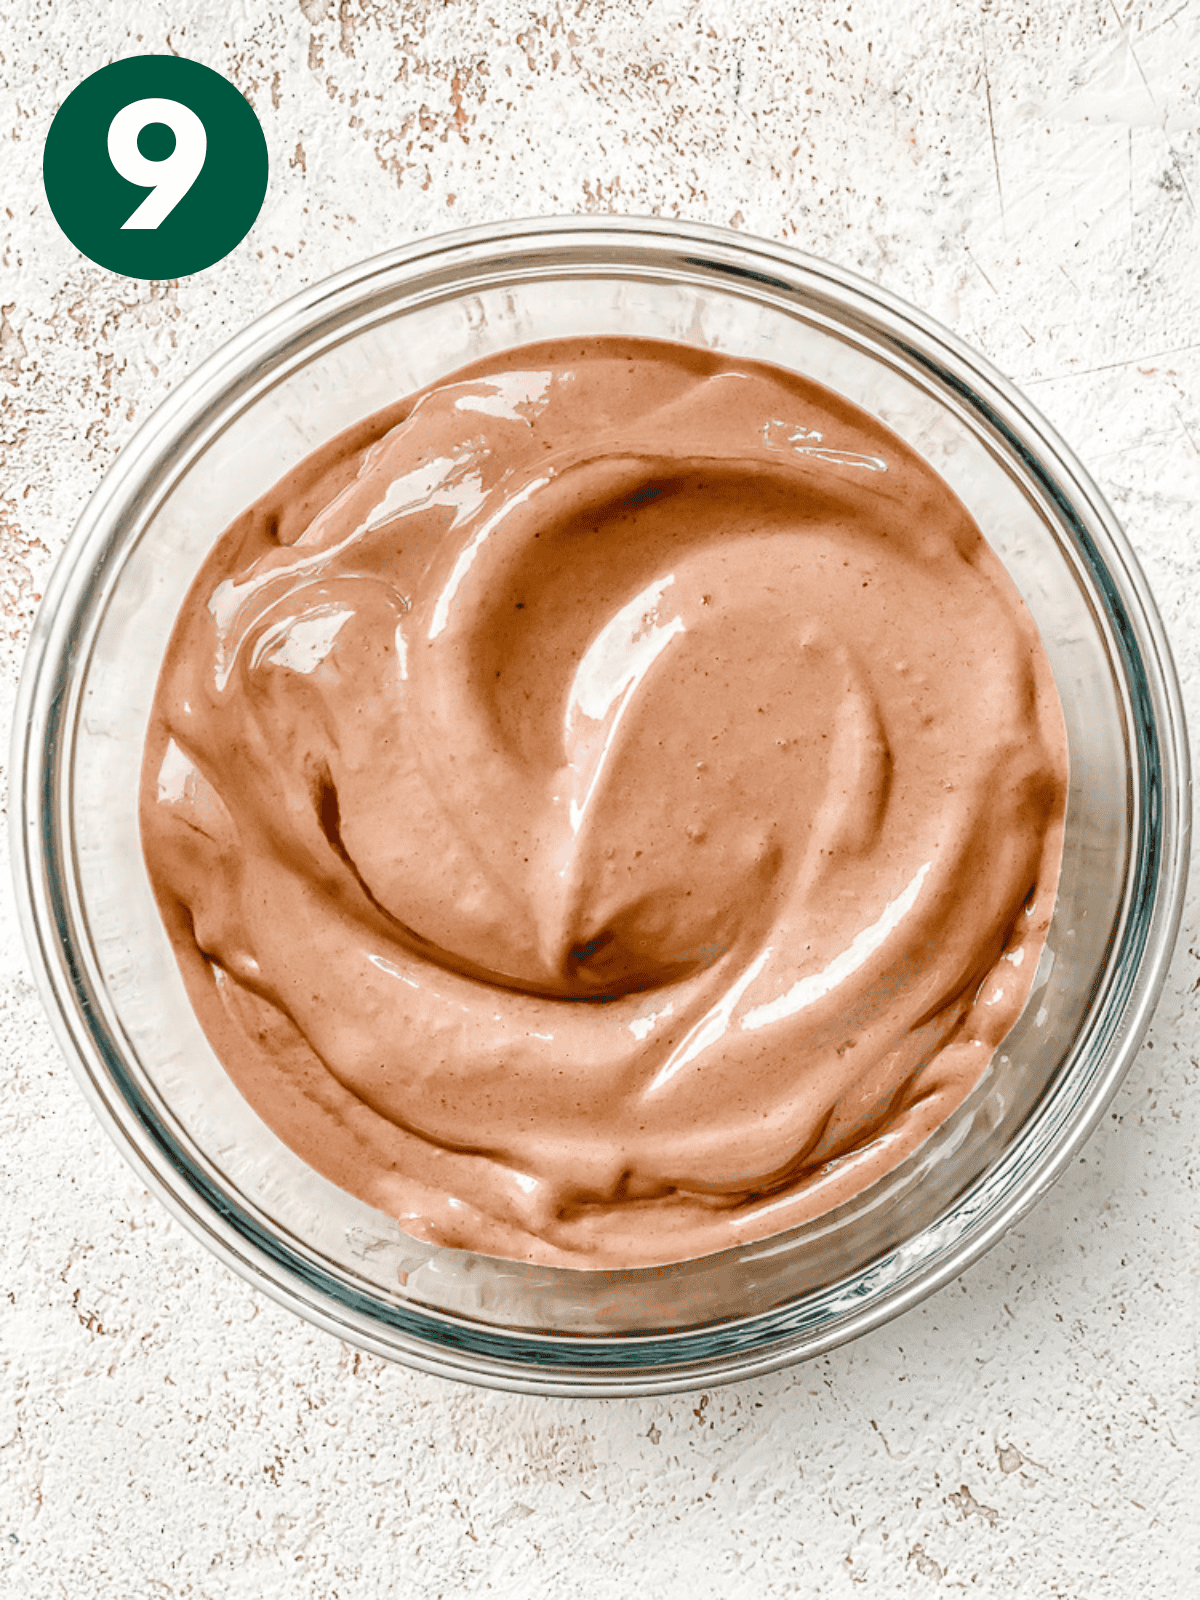 blended chocolate pb banana ice cream in a glass container.